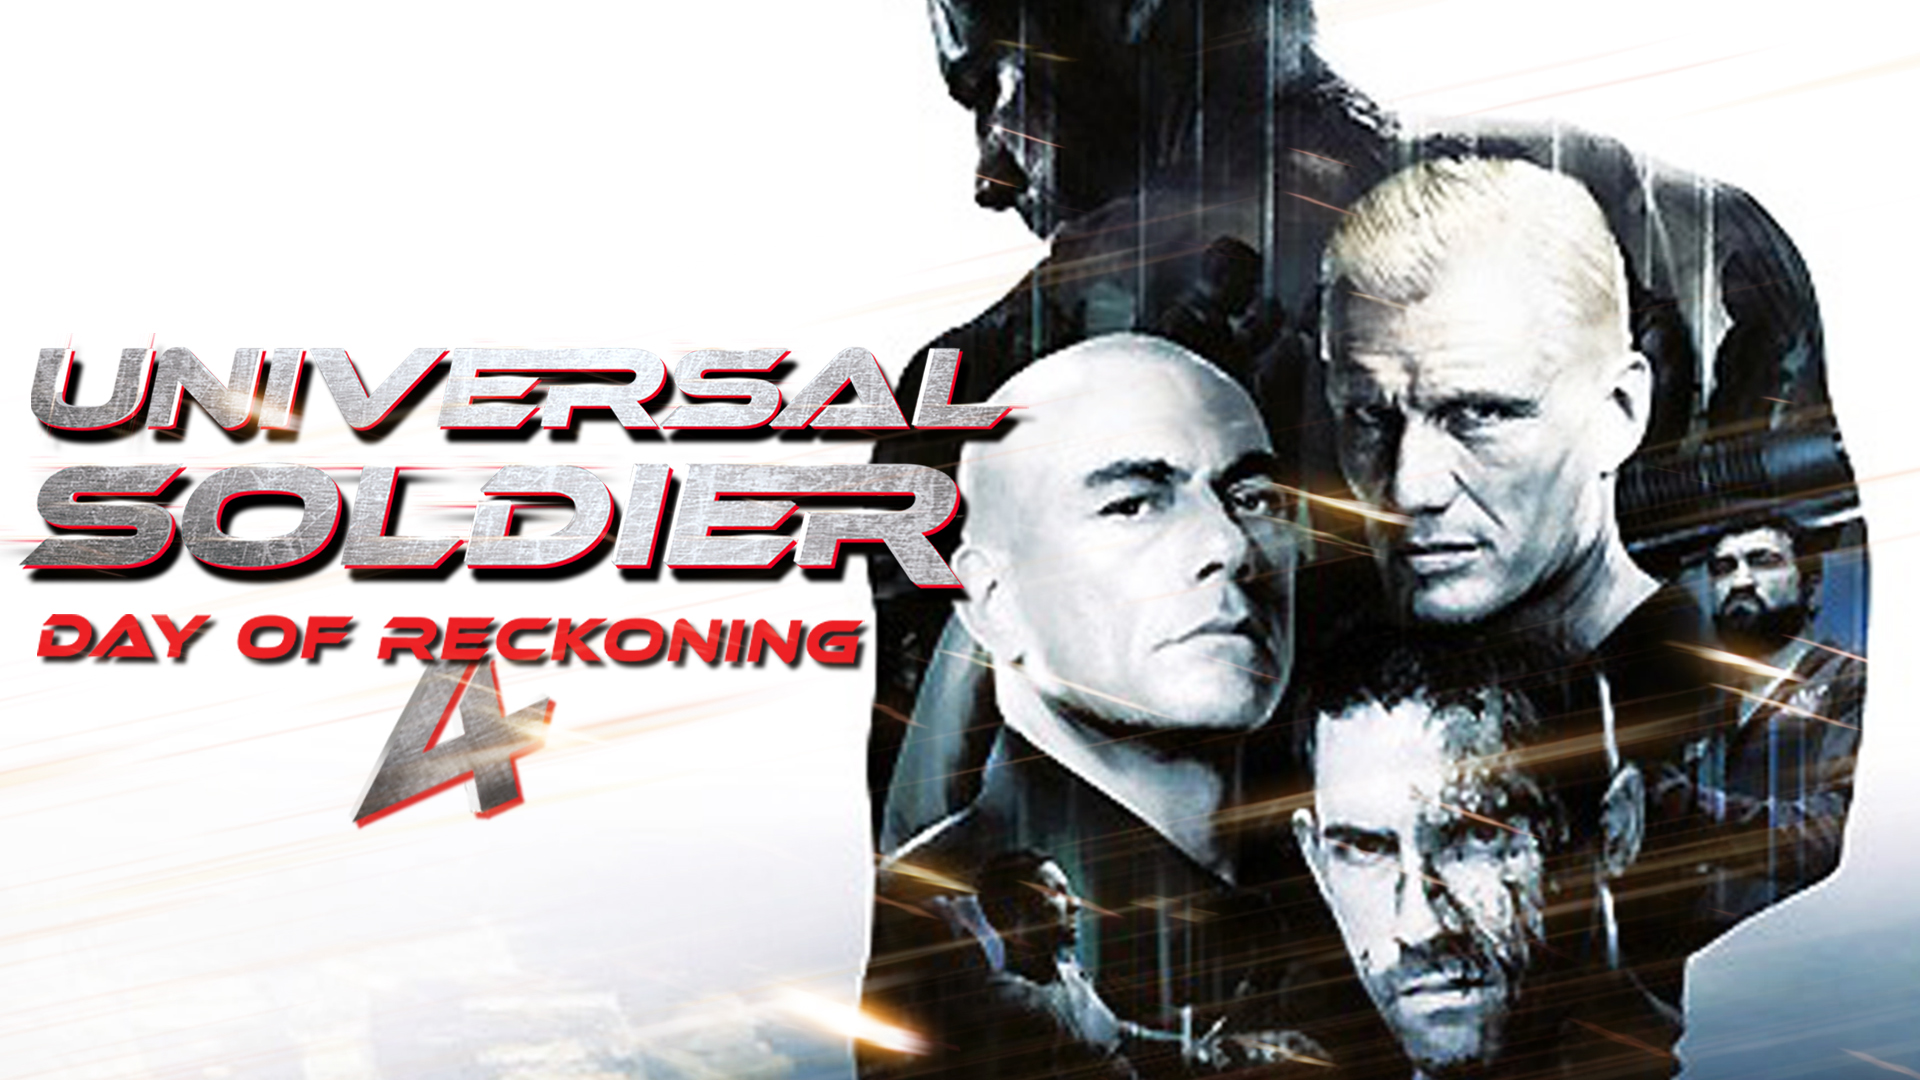 UNIVERSAL SOLDIER 4 a.k.a. UNIVERSAL SOLDIER DAY OF RECKONING